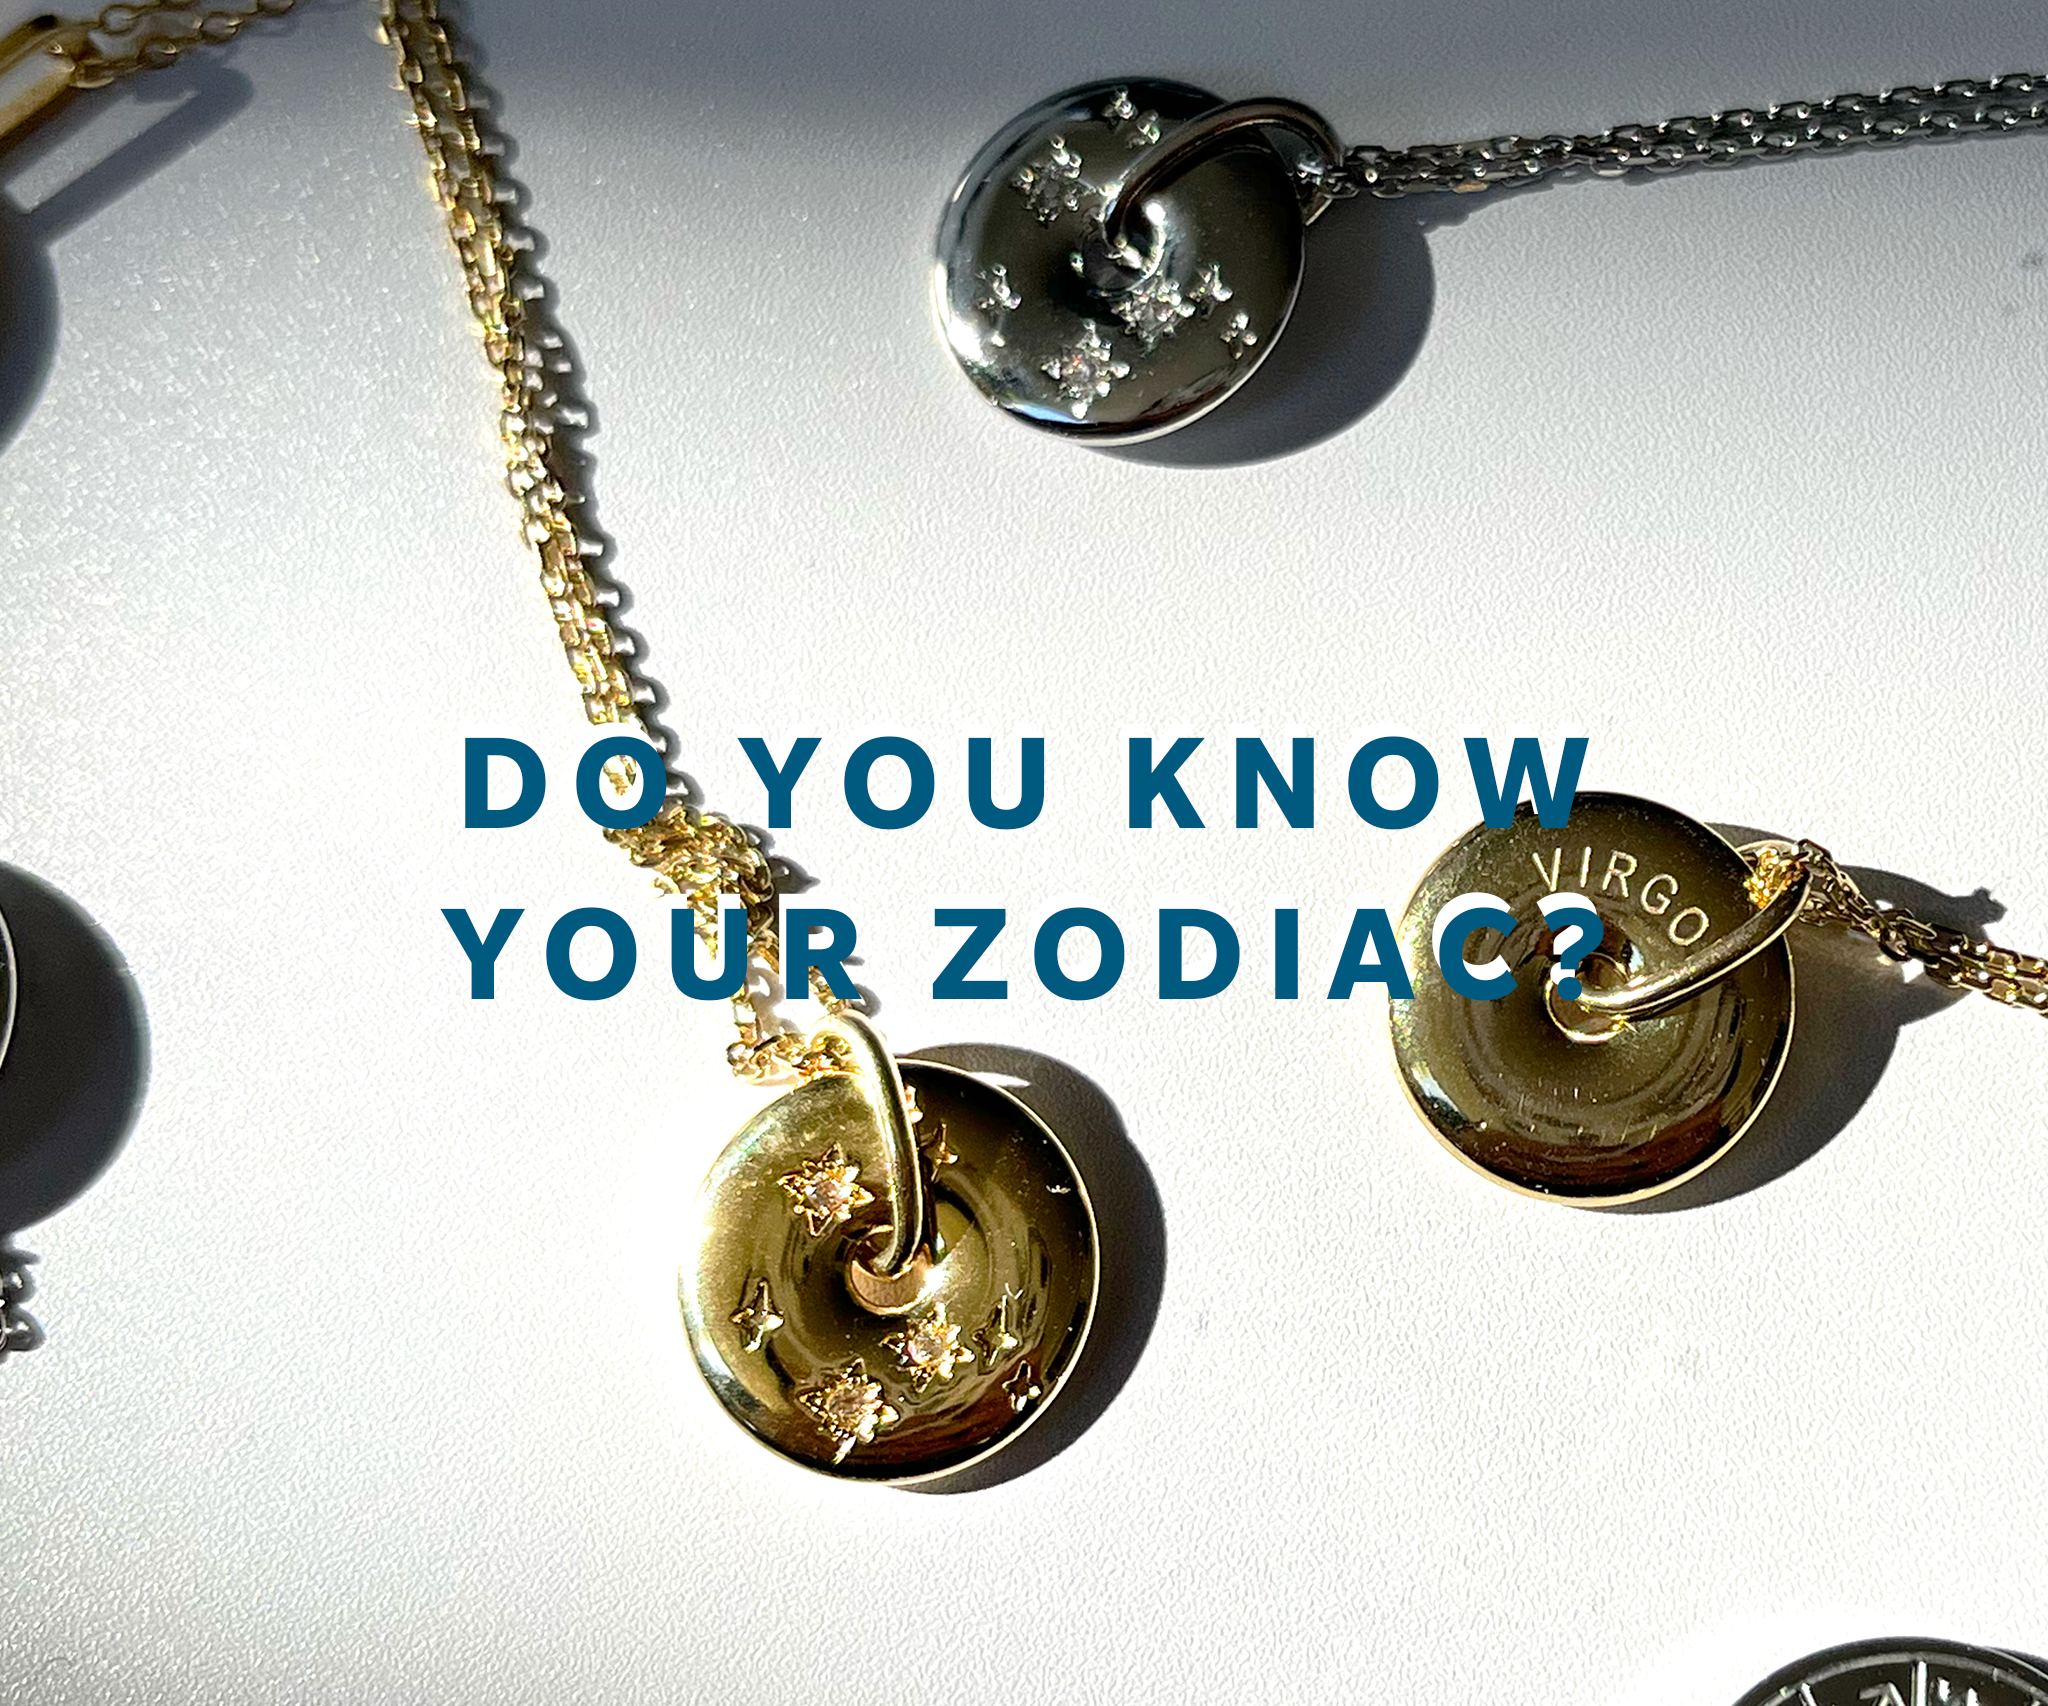 About Zodiac Signs